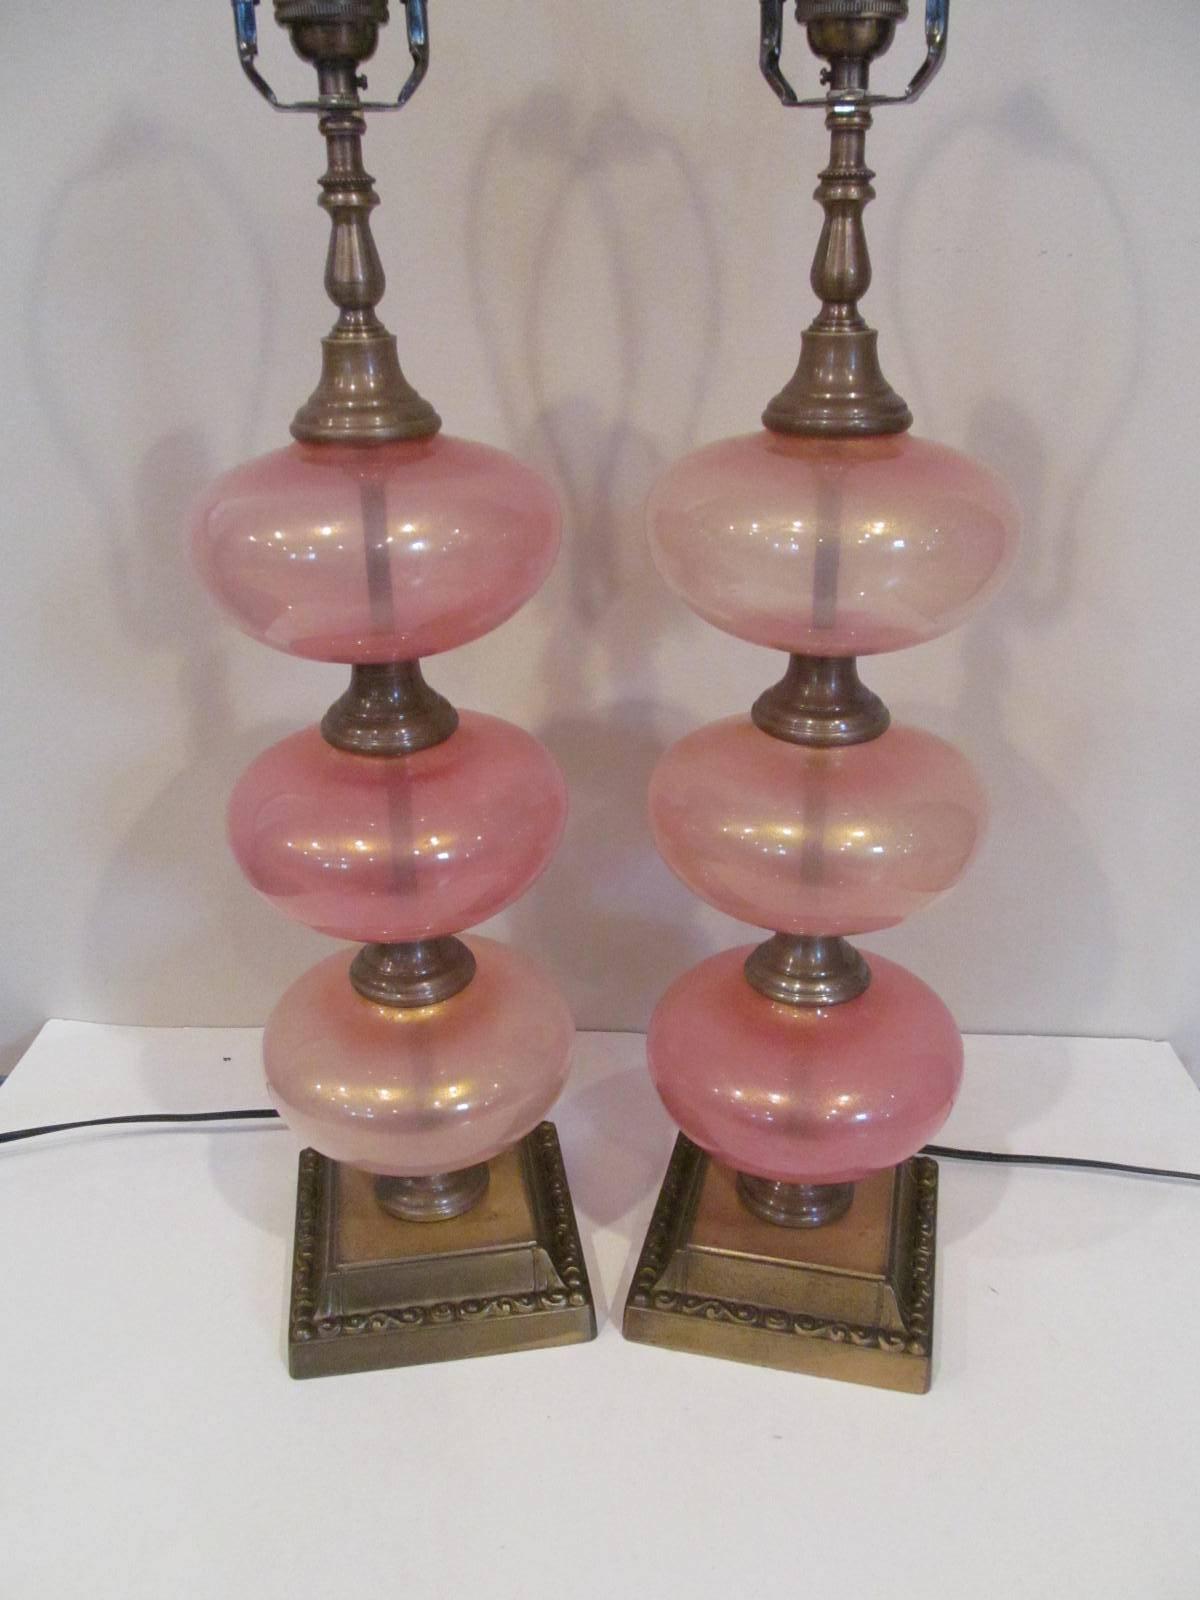 Wonderful pair of Murano lamps in peach color with gold highlights in the glass. The glass was handblown in Murano in the 1950s. This pair of lamps has been rewired and is ready for use. Glass height is 13 1/4 inches.